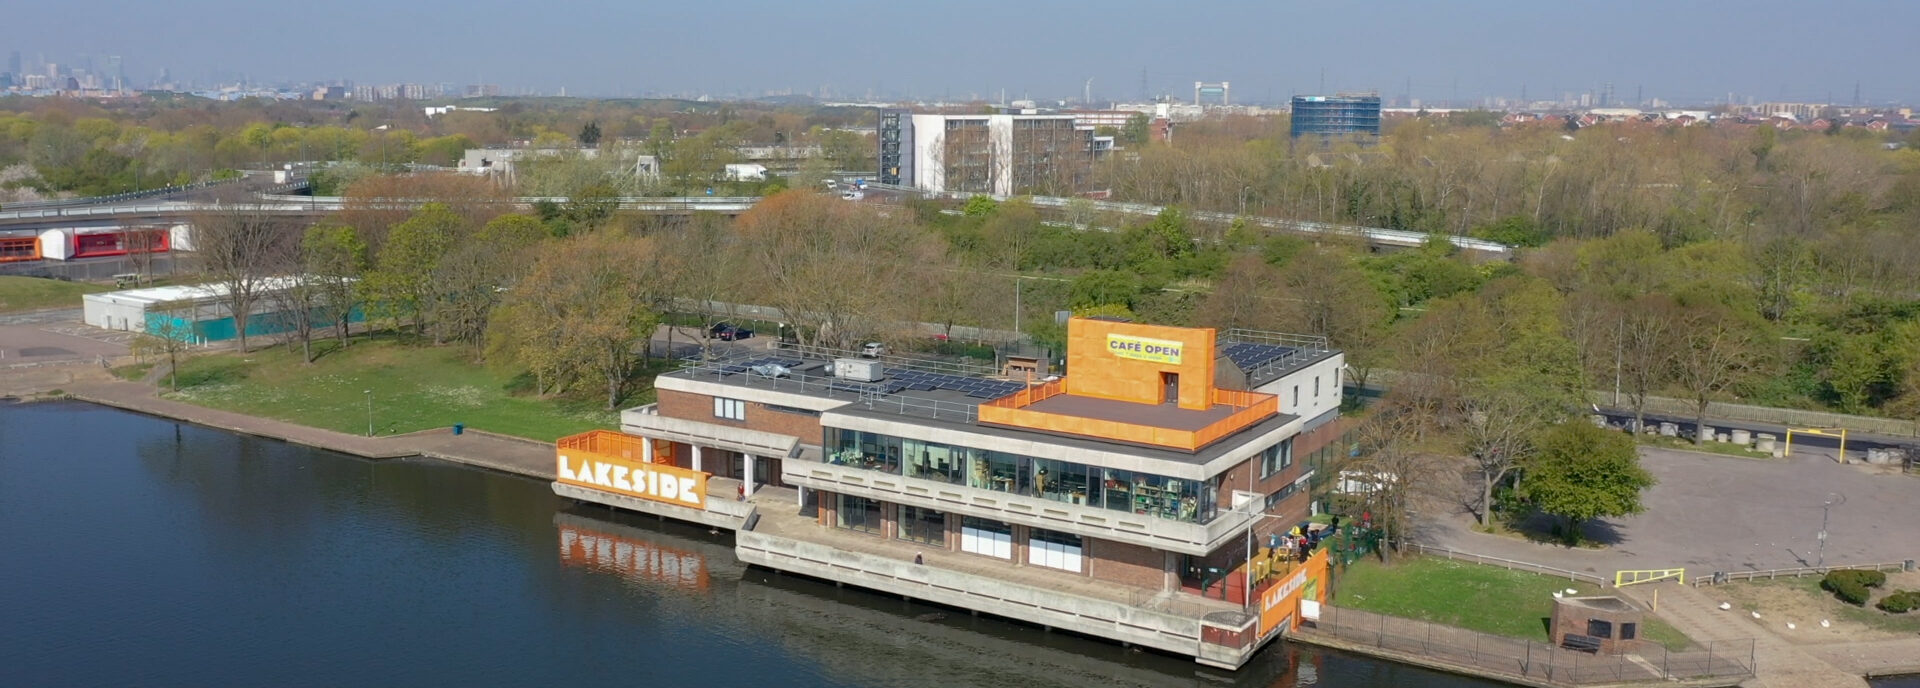 A view of The Lakeside Centre, a 1960s Brutalist building on Southmere Lake. The building's solar panels are visible.